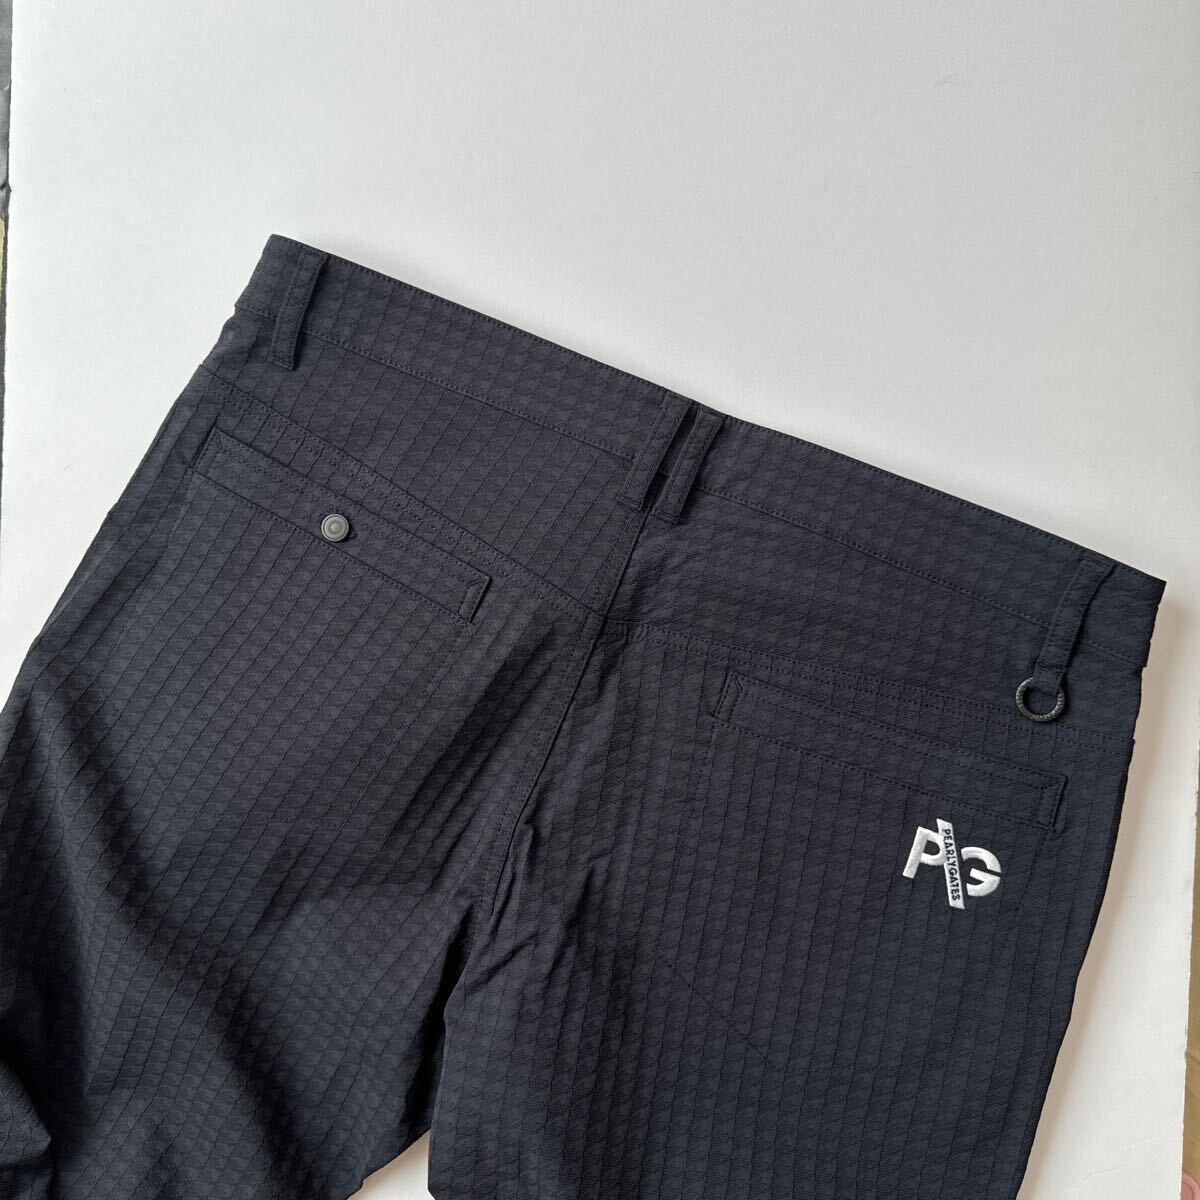 5/L spring summer new goods / dressing up / Pearly Gates /PEARLY GATES/ men's / art pike stretch pants / high performance / Golf pants /s rack / navy navy blue 